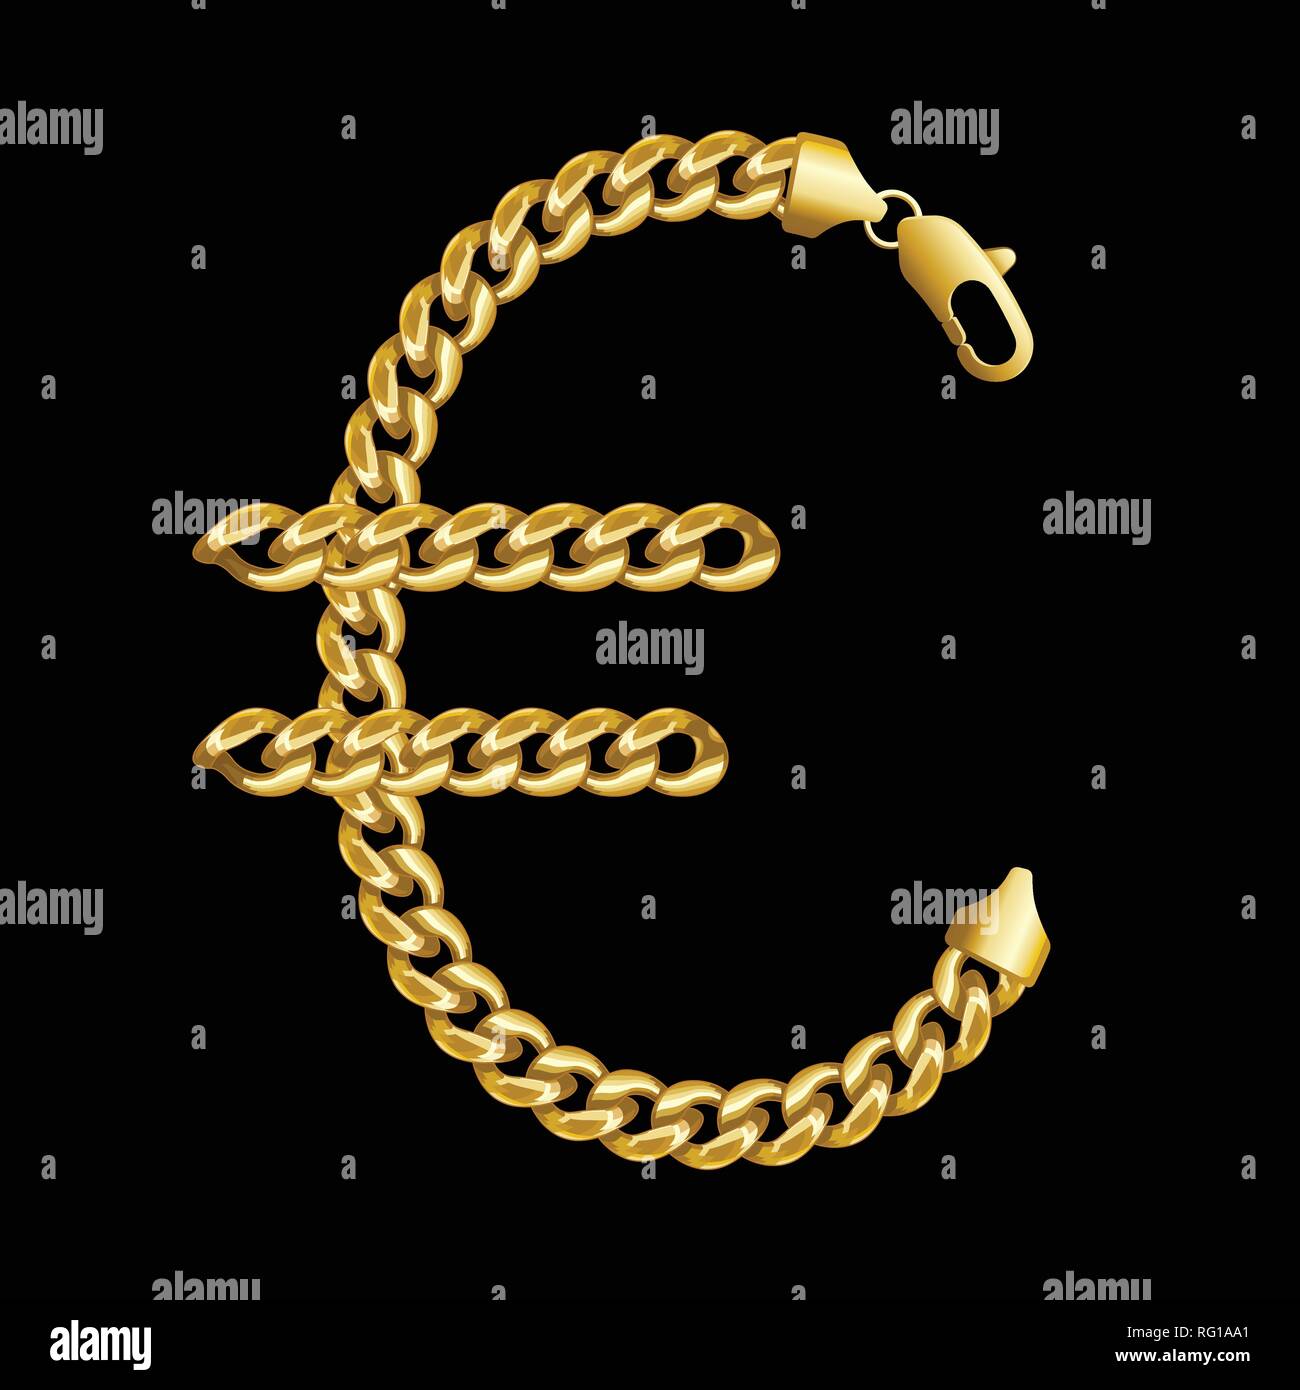 Gold euro money sign made of shiny thick golden chains with a lobster lock. Stock Vector